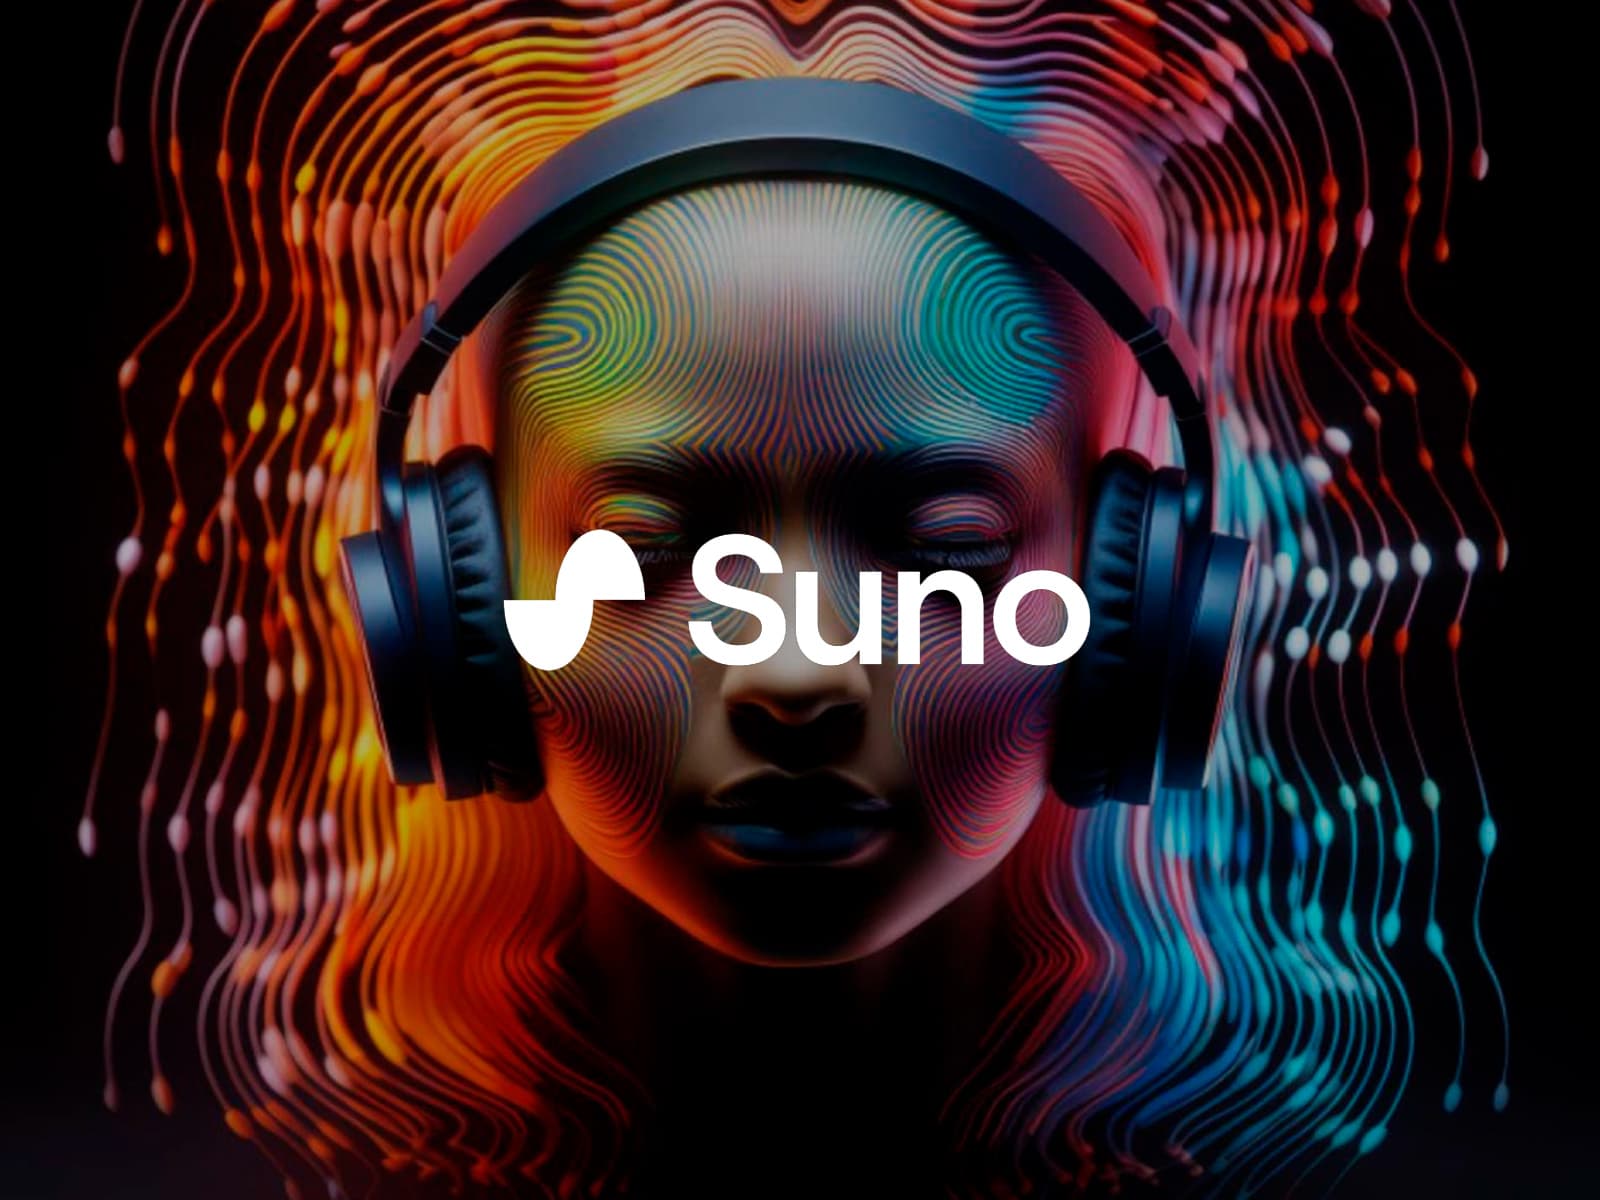 Suno - Make a Song About Anything with AI